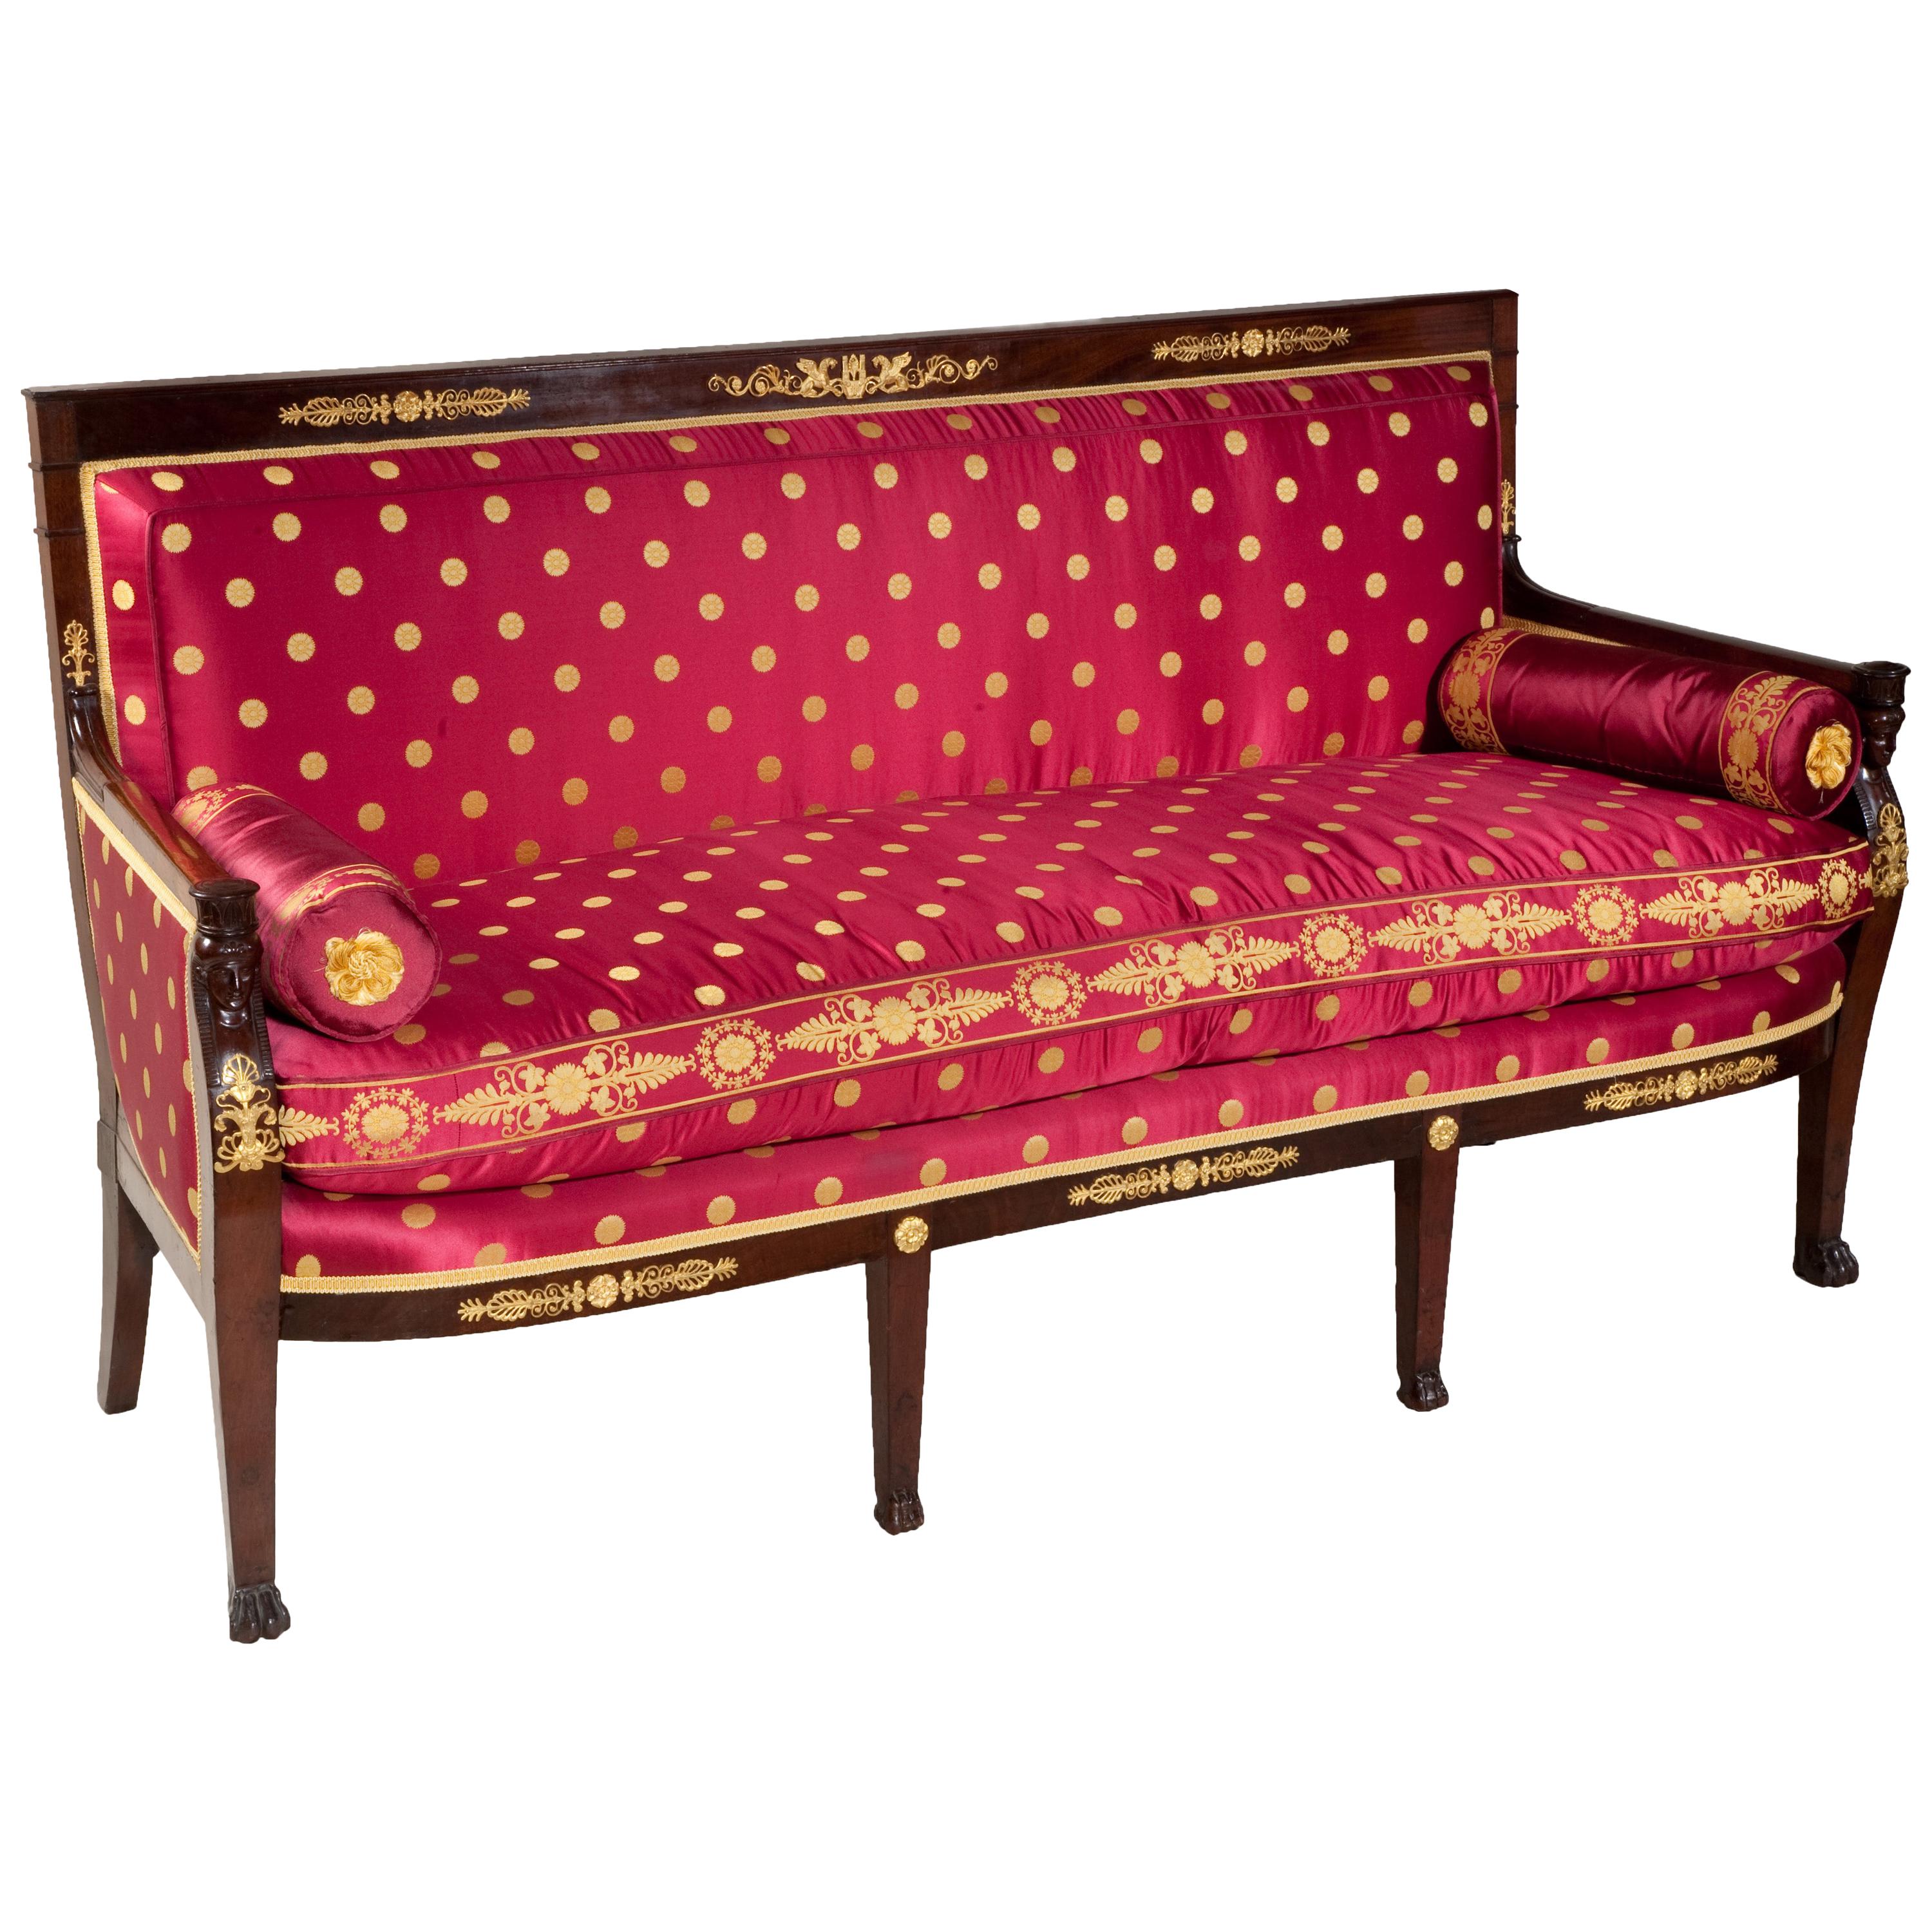 Period French Empire Settee in Red Silk Damask Attributed to Jacob